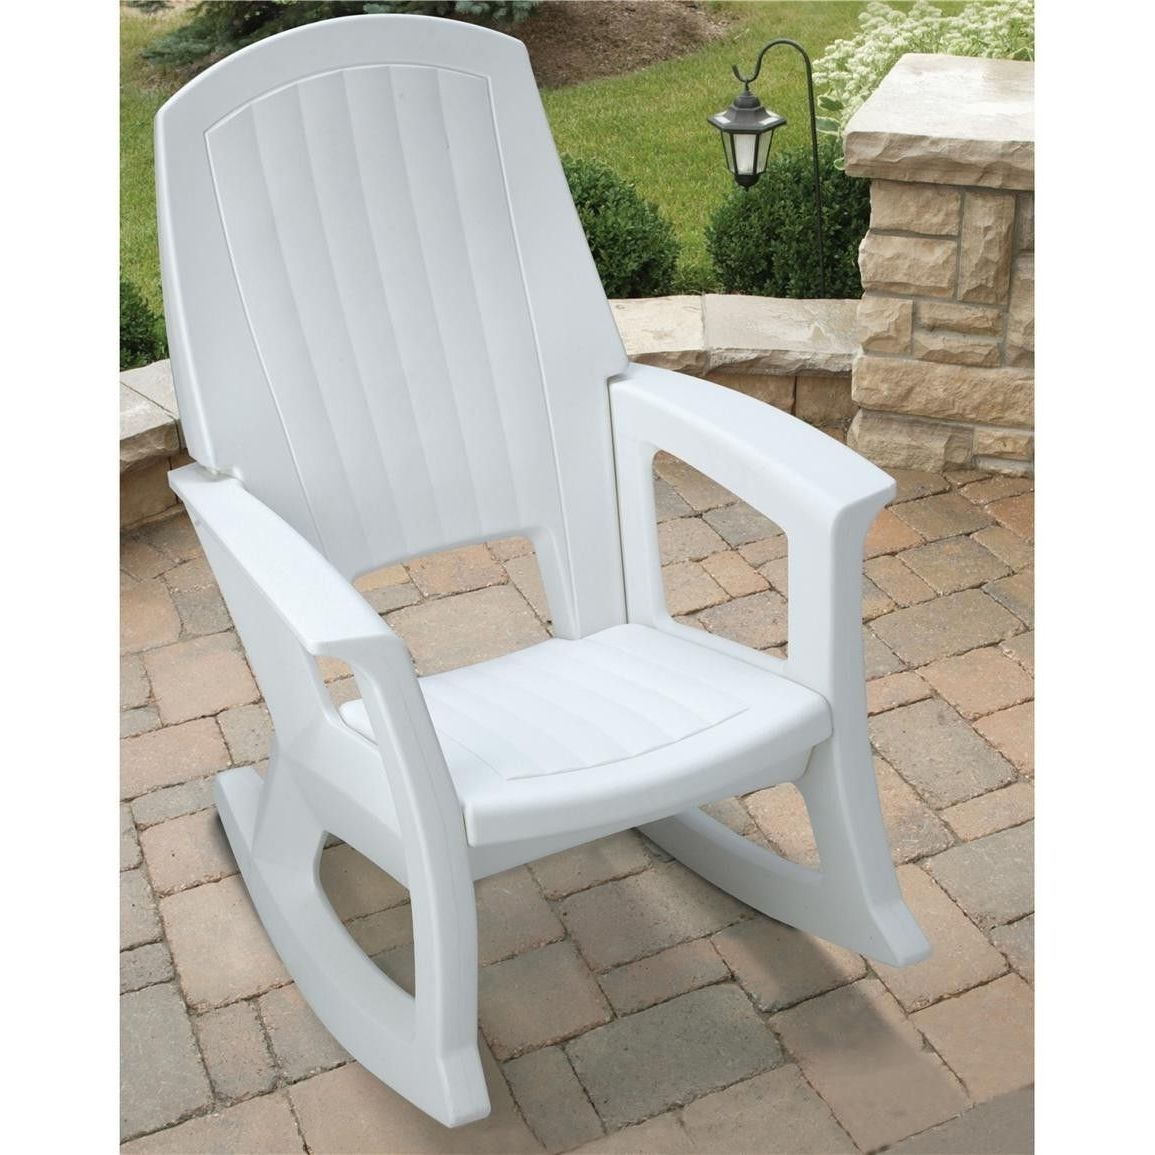 Most Popular Semco Plastics White Resin Outdoor Patio Rocking Chair Semw : Rural Inside Plastic Patio Rocking Chairs (View 1 of 15)